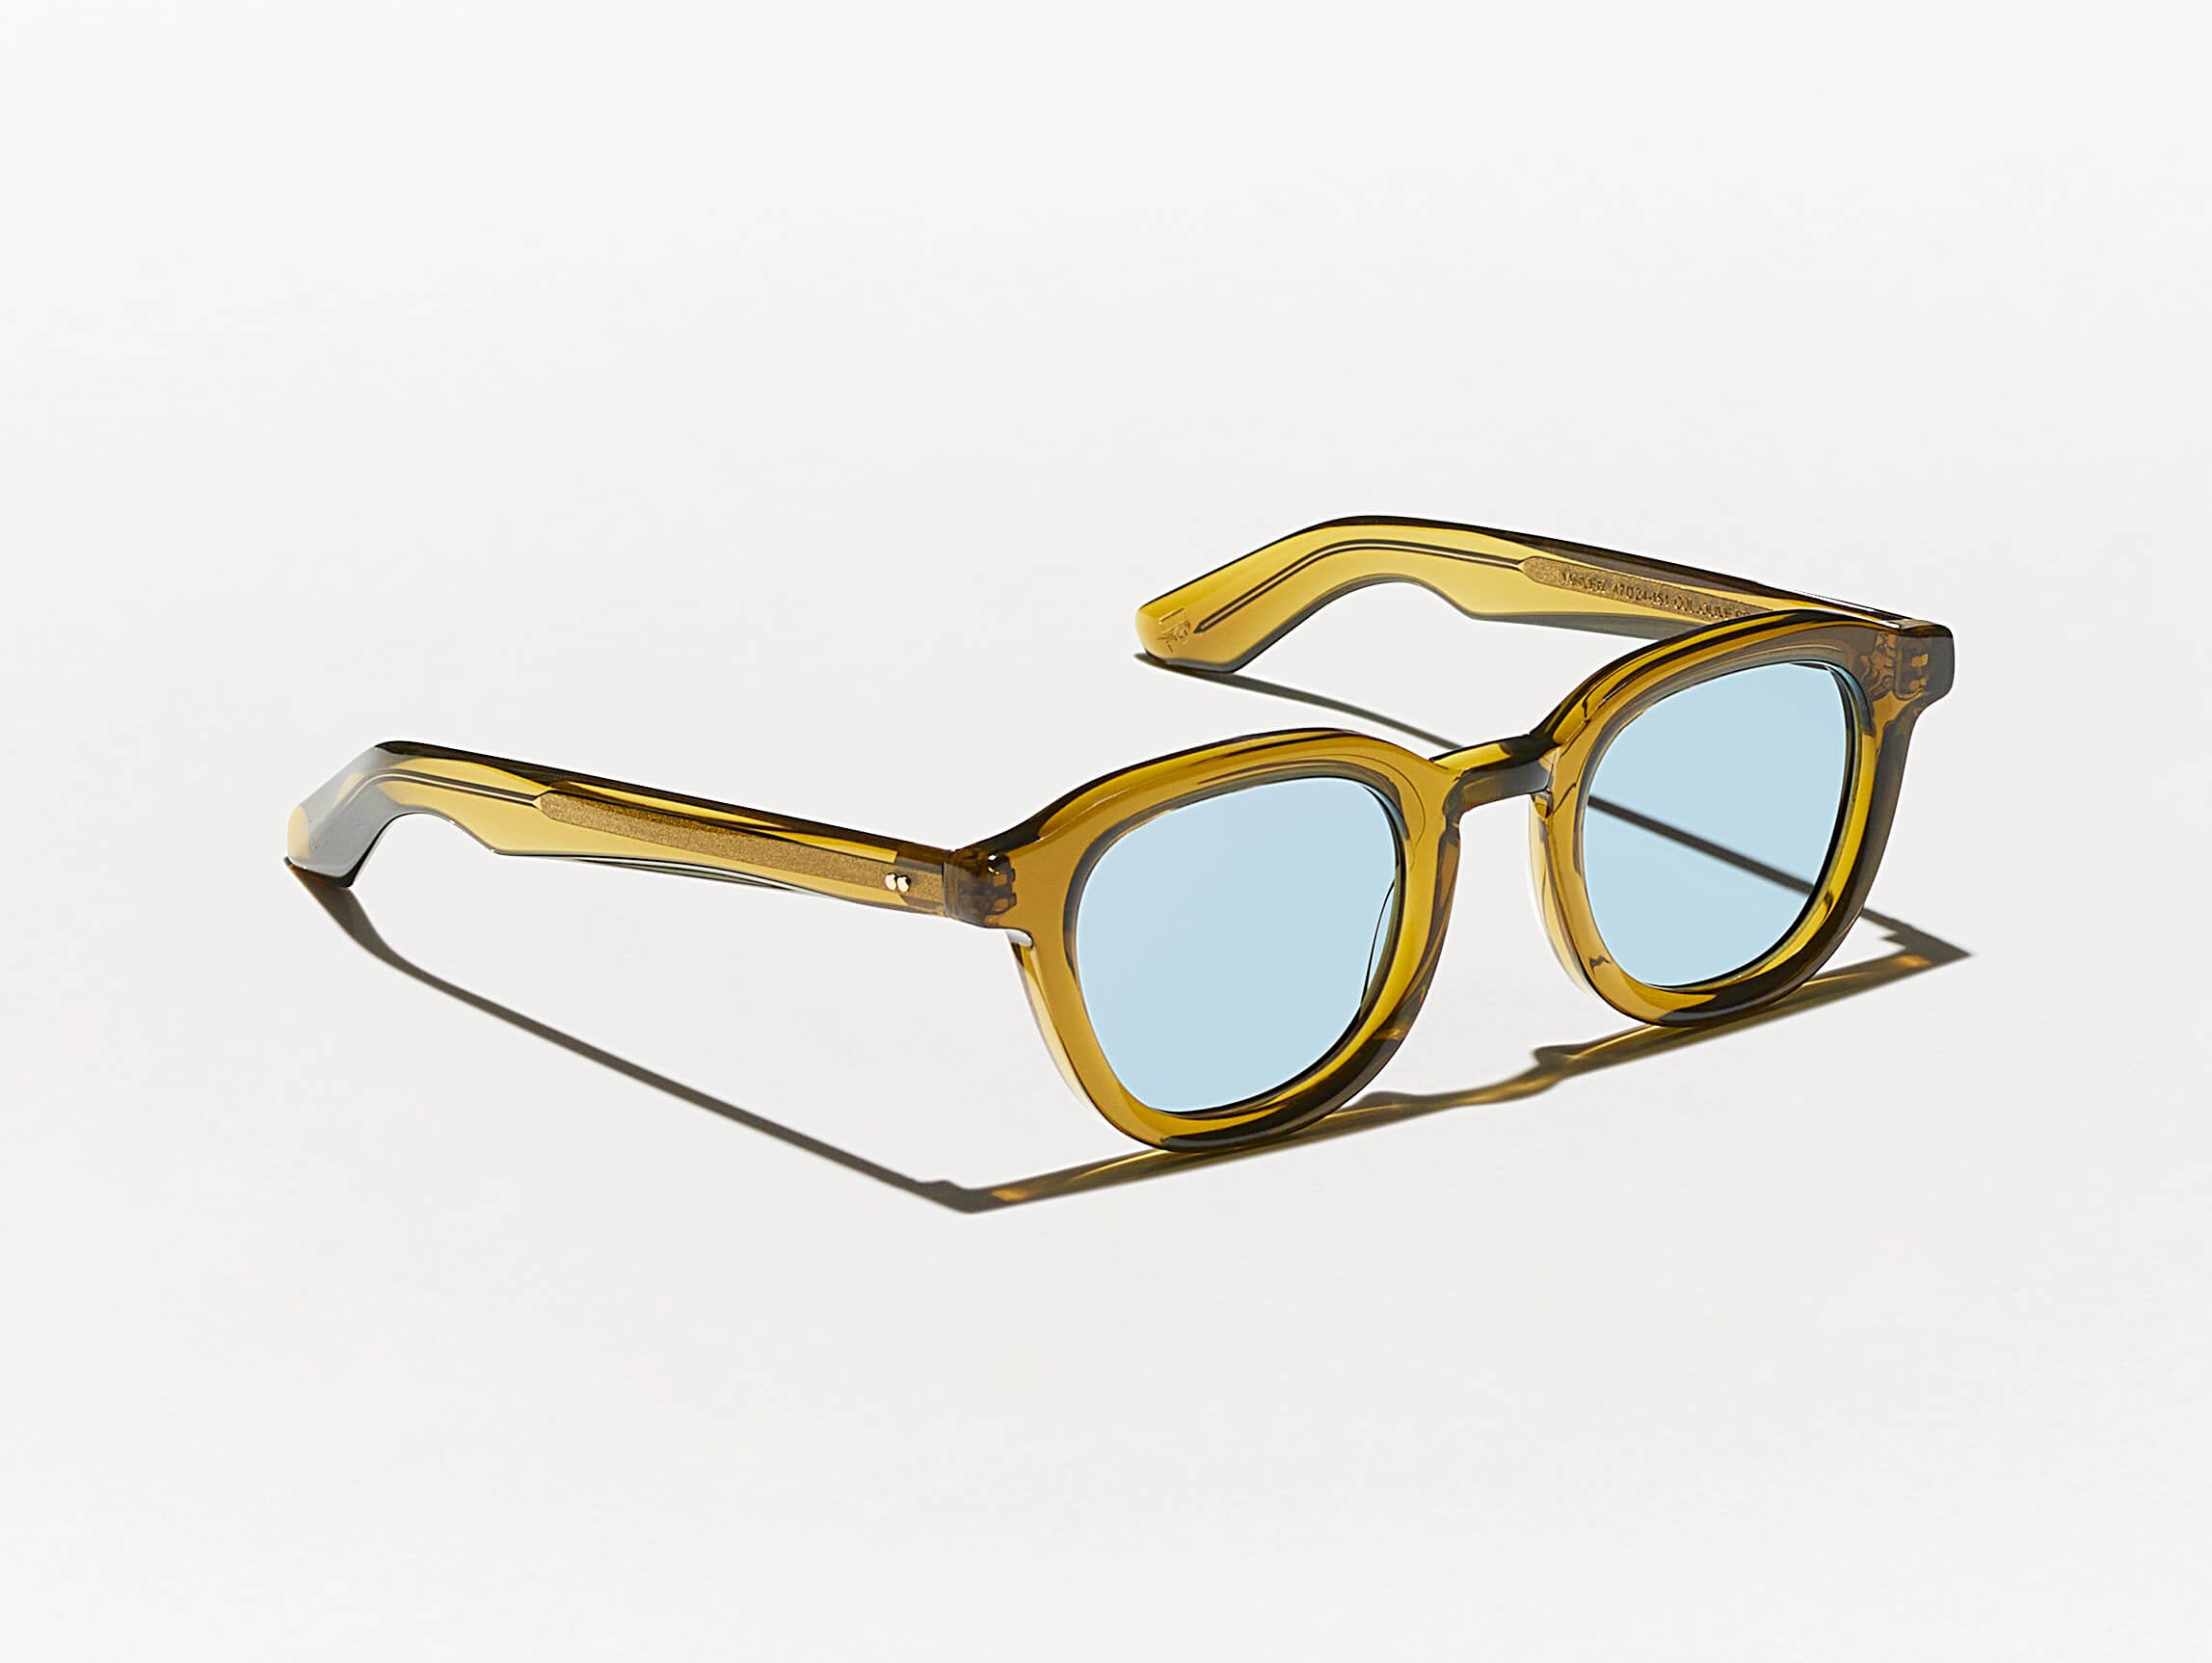 The DAHVEN in Olive Brown with Bel Air Blue Tinted Lenses